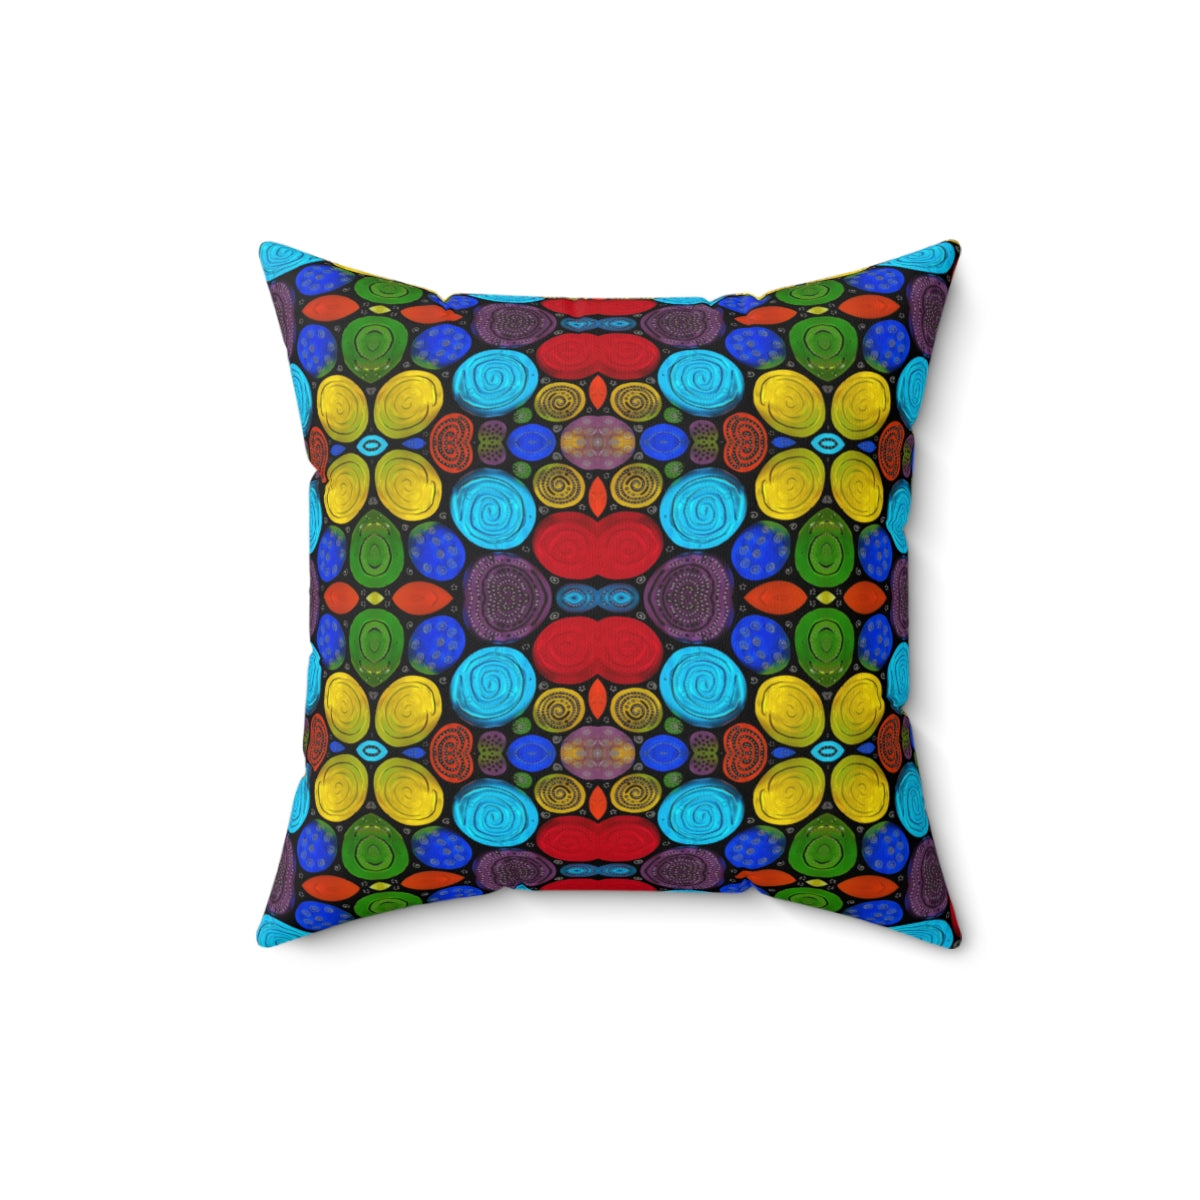 fun colorful throw pillow for home decorating